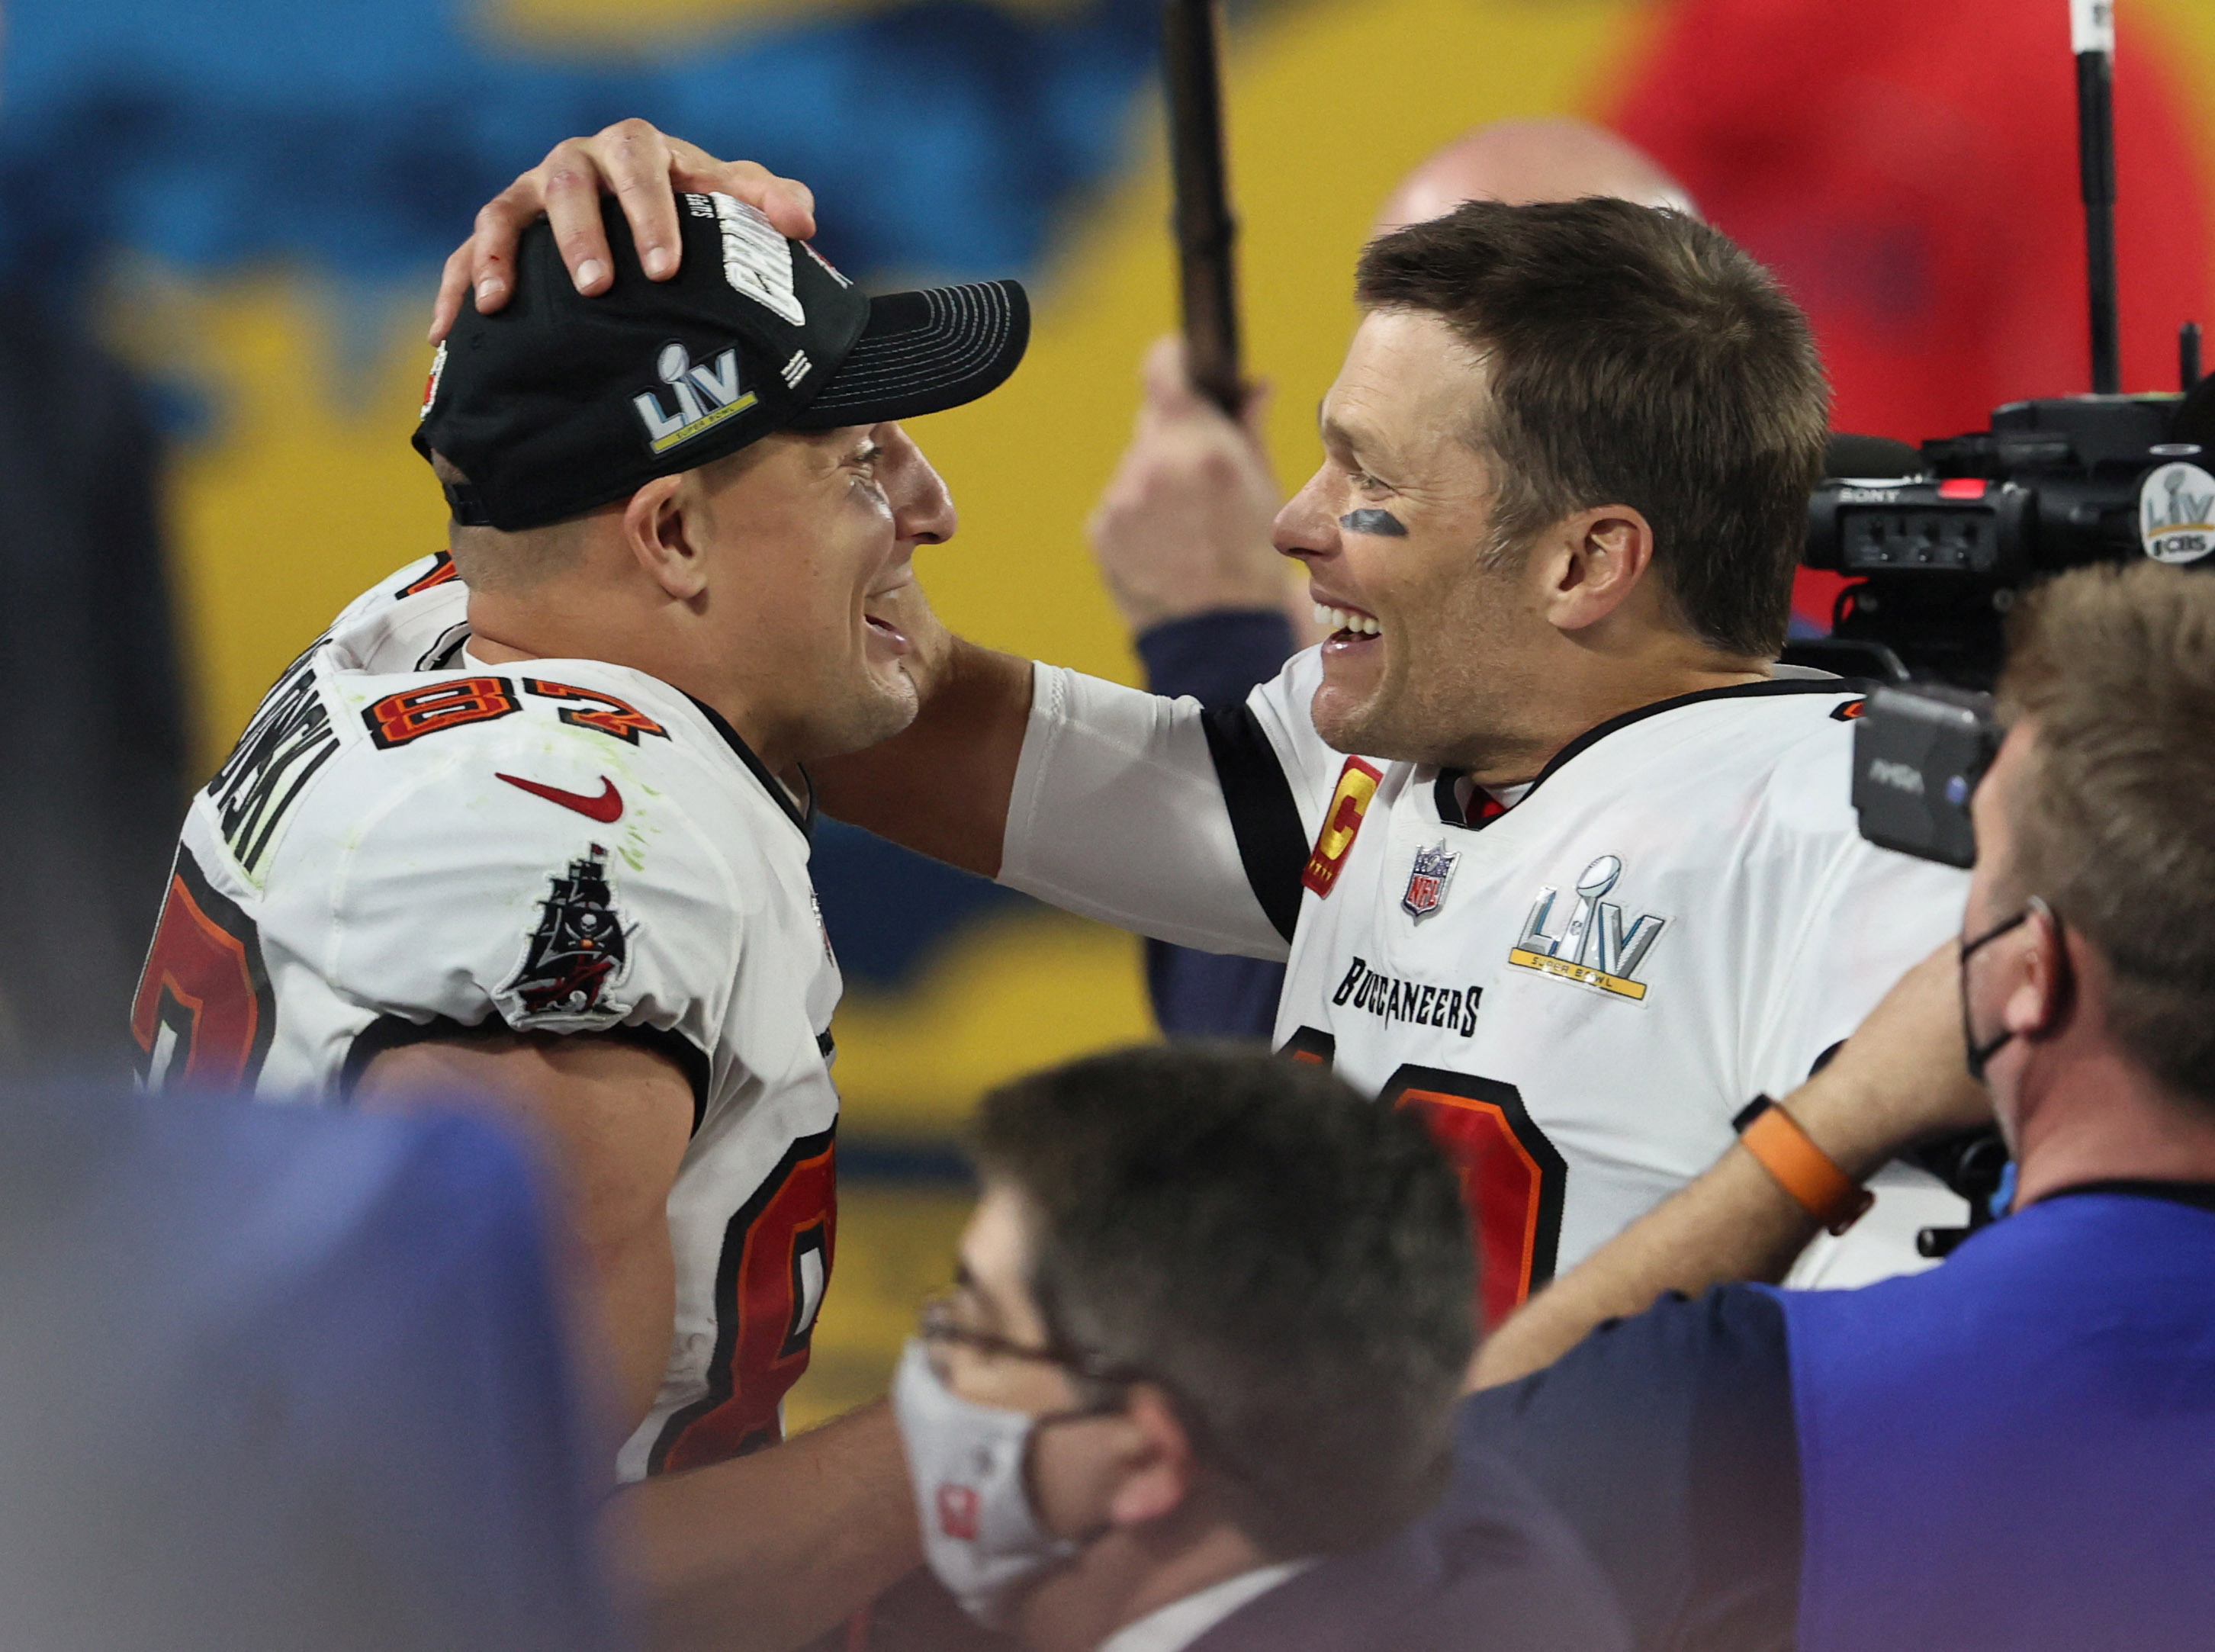 How would Firmiani and Florence Guelfi fare against Brady, Gronk and the Tampa Bay Buccanears? FILE PHOTO: Feb 7, 2021; Tampa, FL, USA; Tampa Bay Buccaneers quarterback Tom Brady (12) and tight end Rob Gronkowski (87) celebrate after defeating the Kansas City Chiefs in Super Bowl LV at Raymond James Stadium.  Mandatory Credit: Matthew Emmons-USA TODAY Sports/File Photo